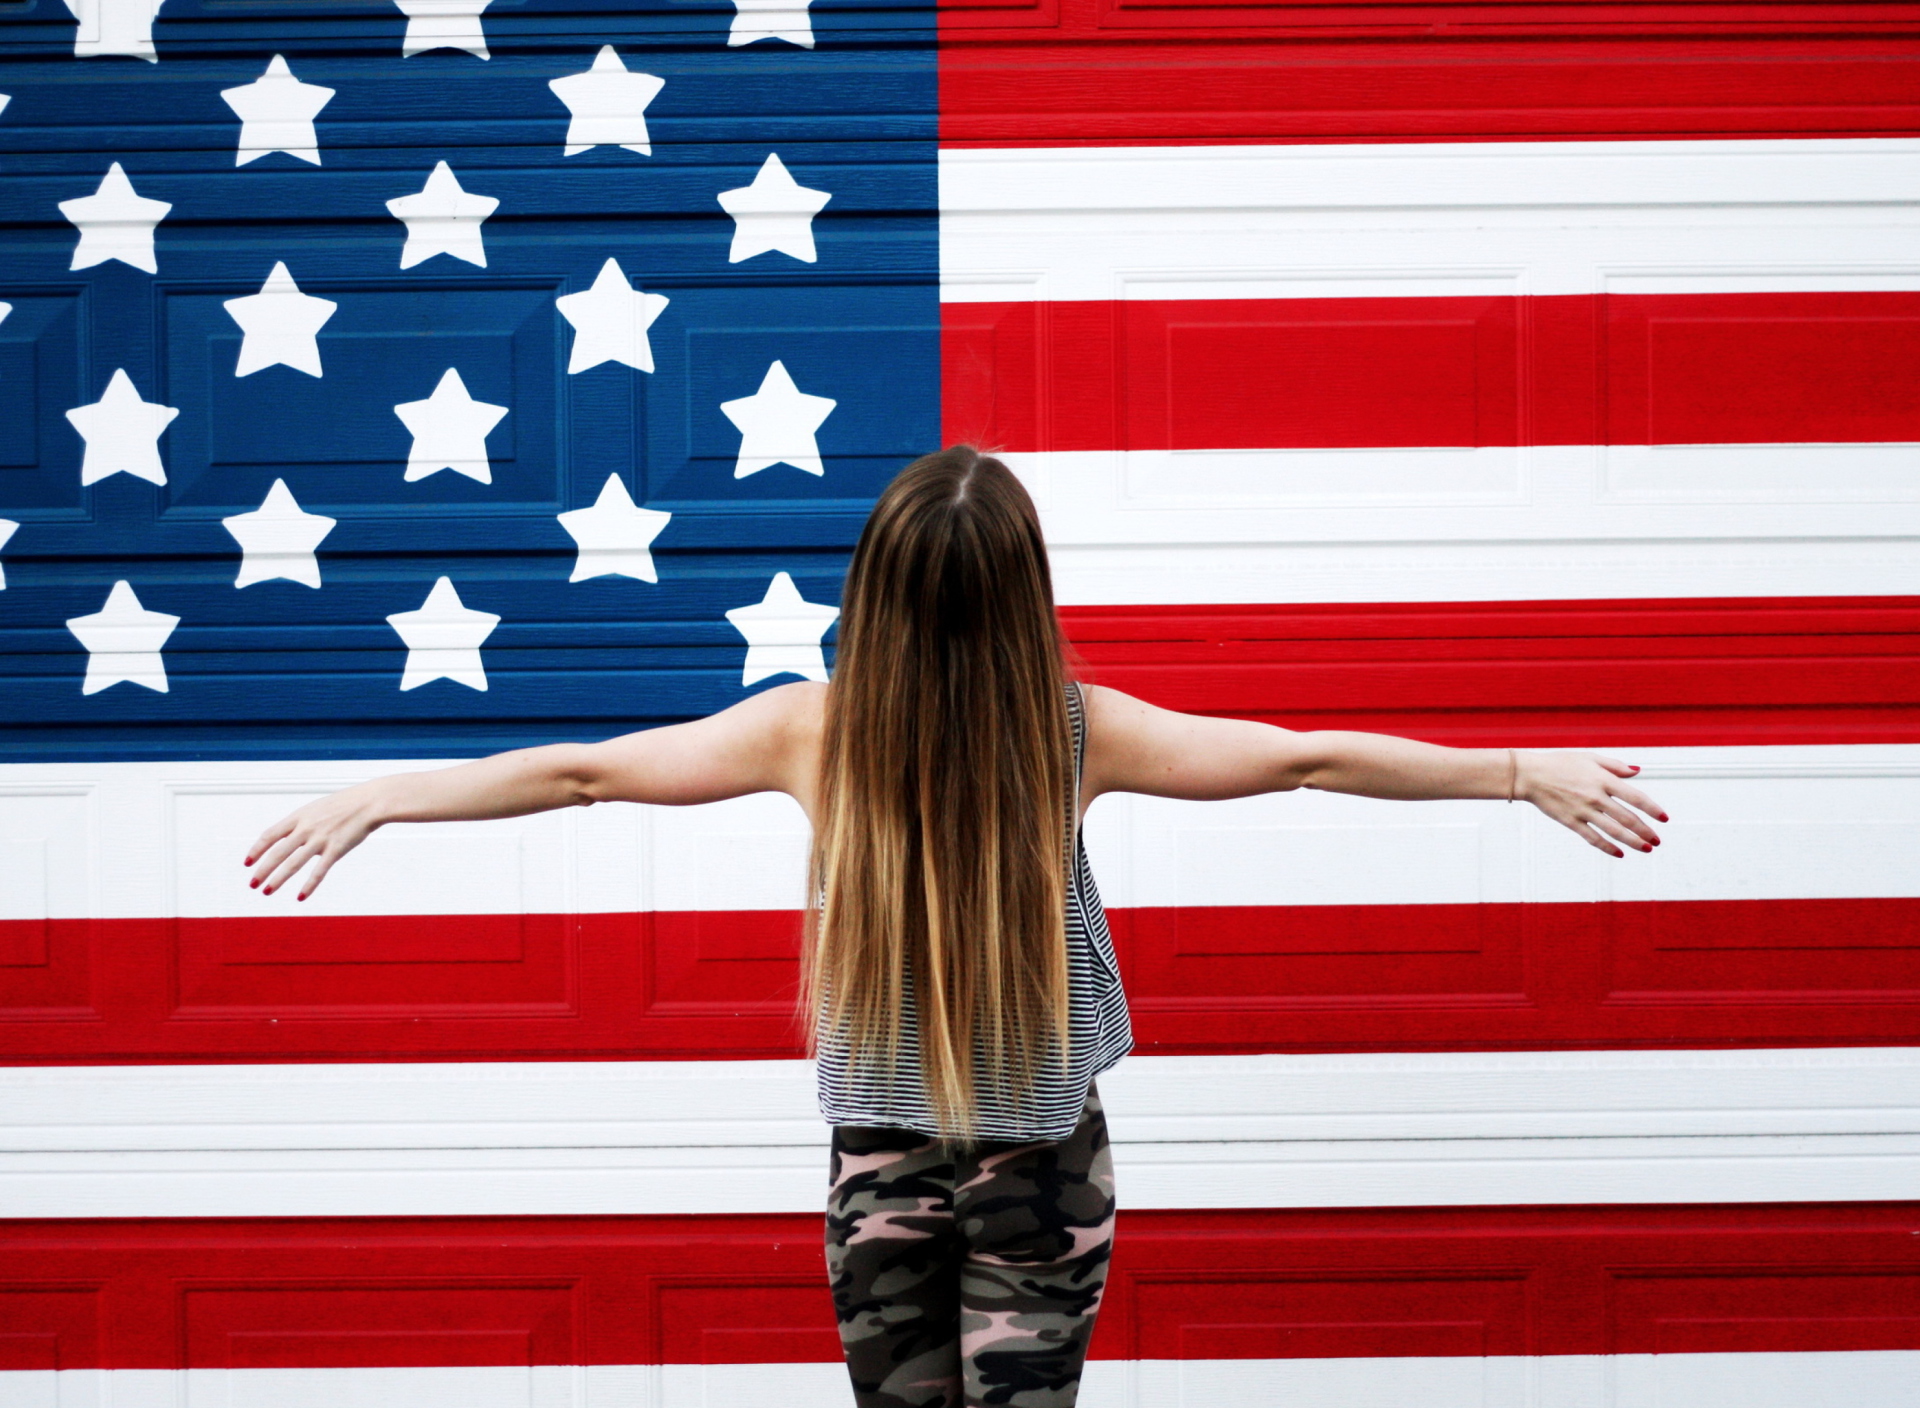 Das American Girl In Front Of USA Flag Wallpaper 1920x1408